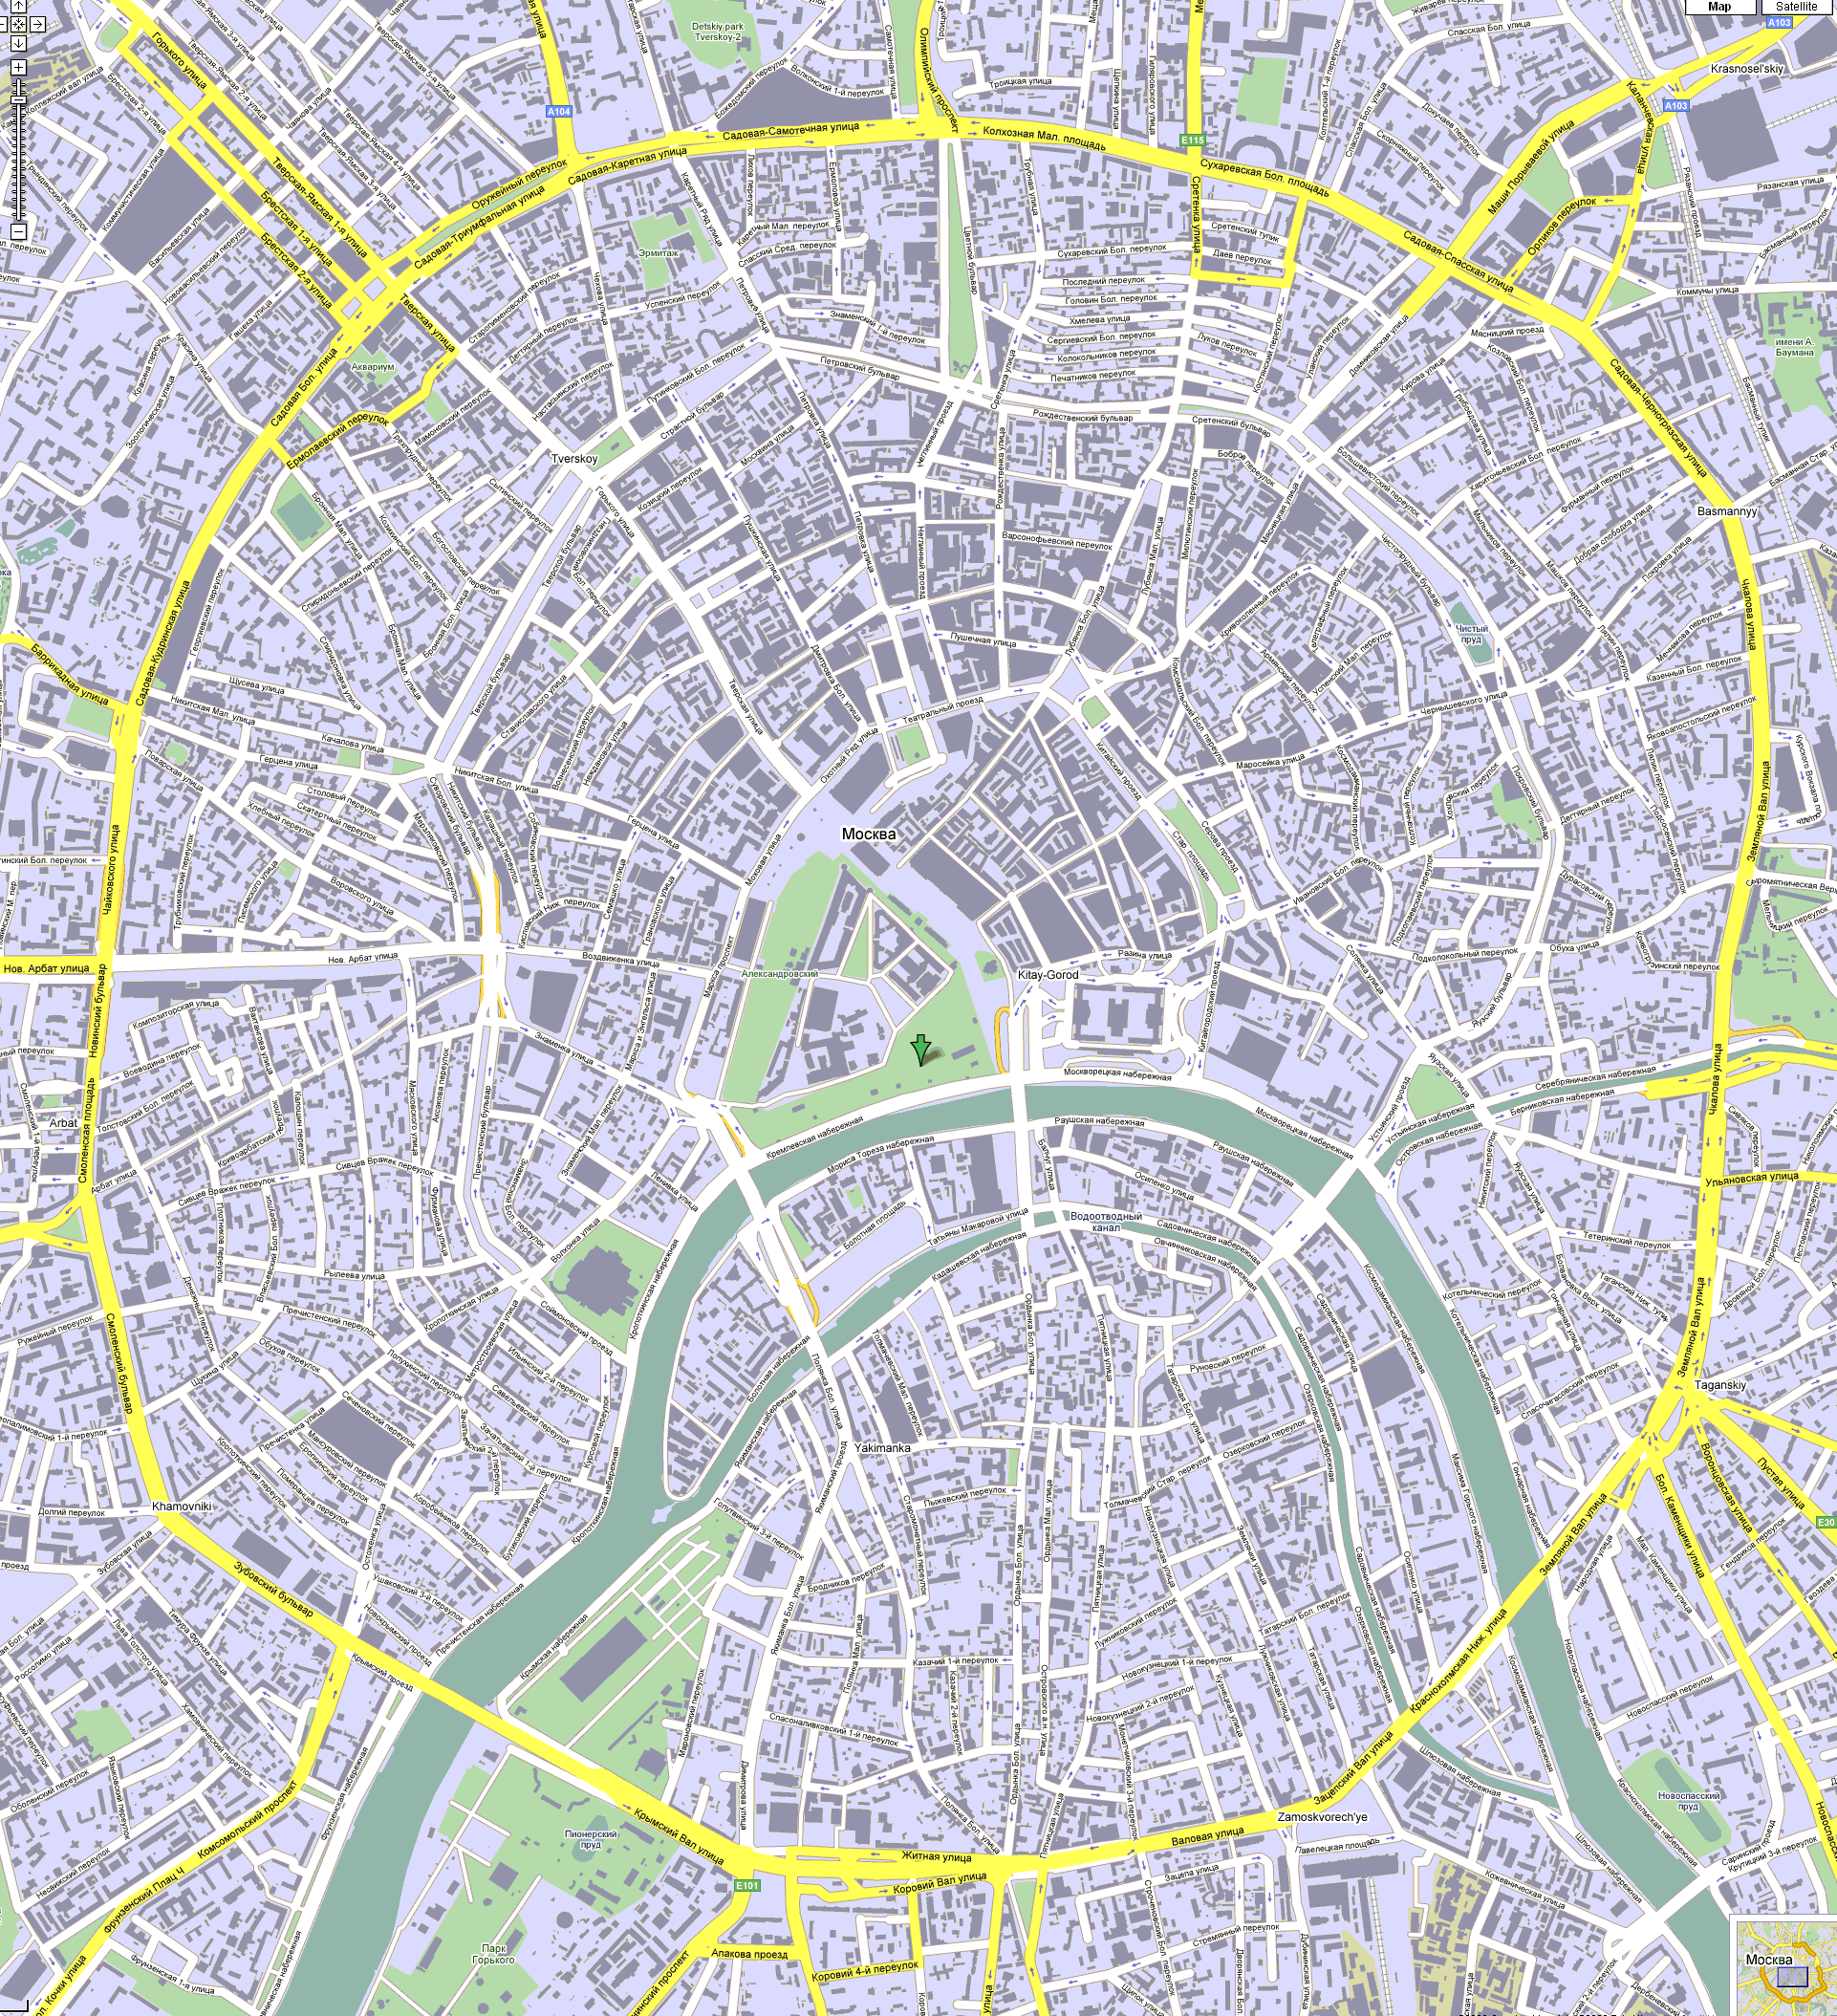 High-resolution large map of Moscow - download for print out